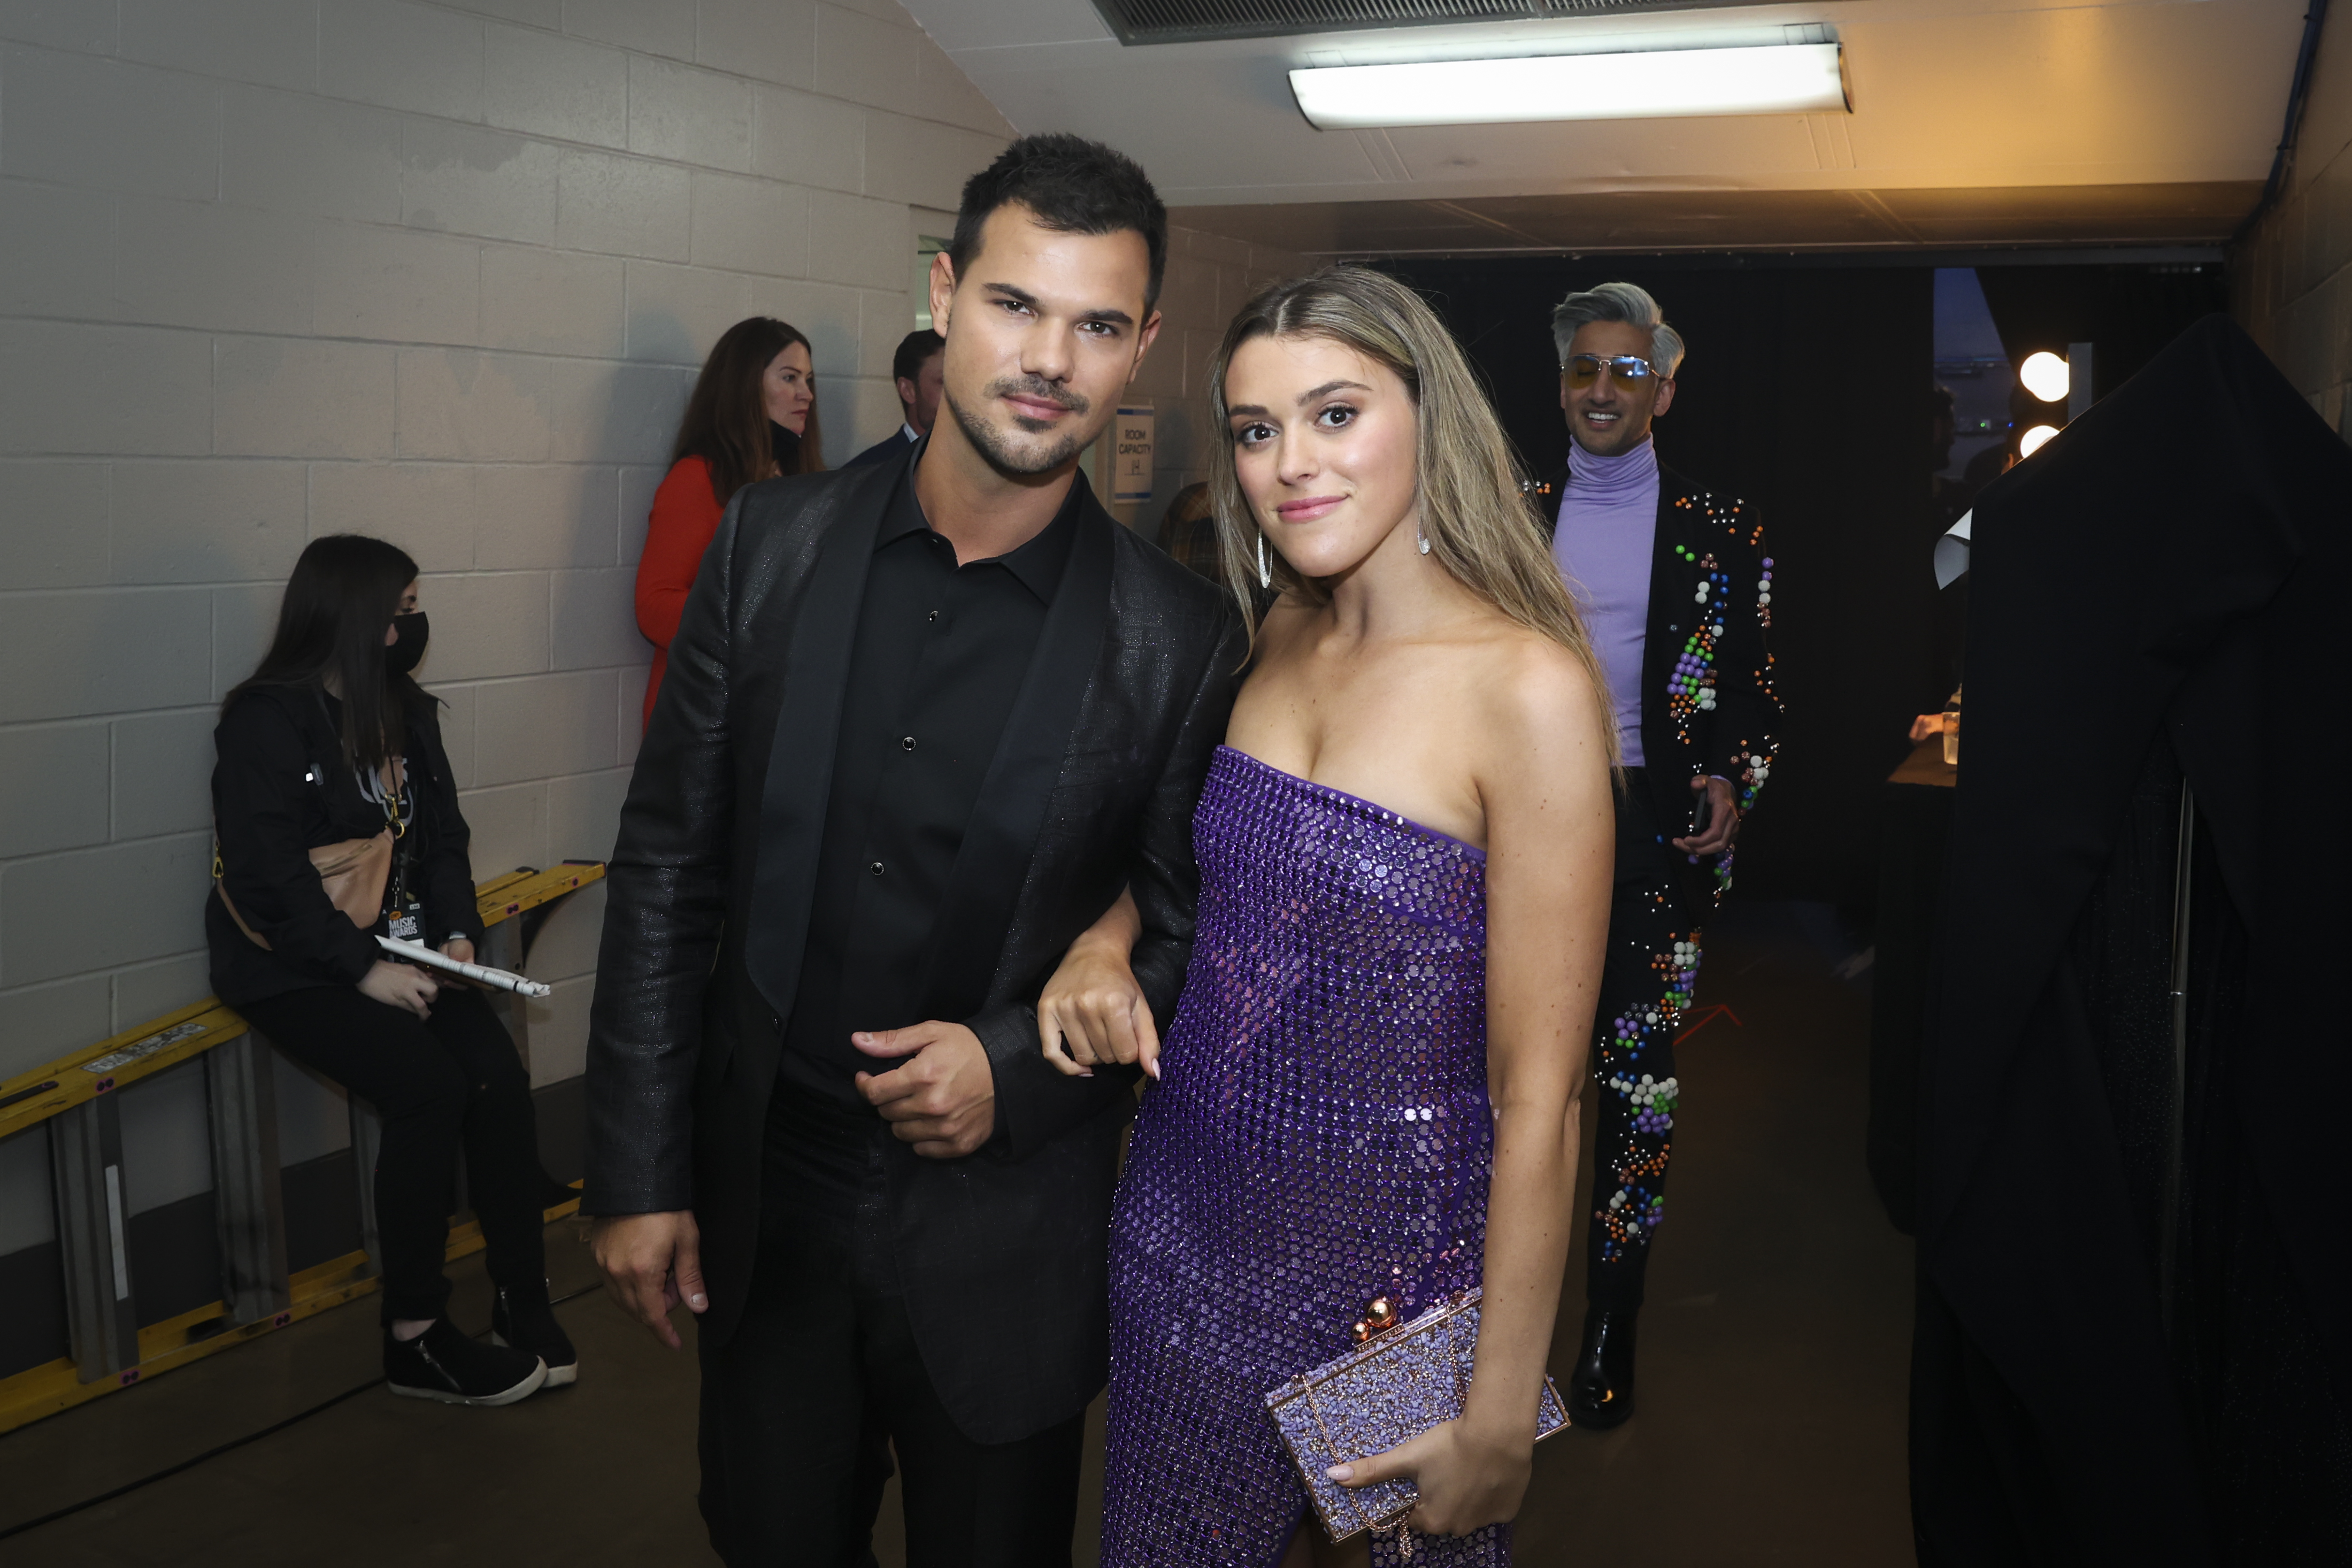 Taylor Lautner and Taylor Dome backstage at the 2022 CMT Music Awards, on Monday, April 11 2022. | Getty Images